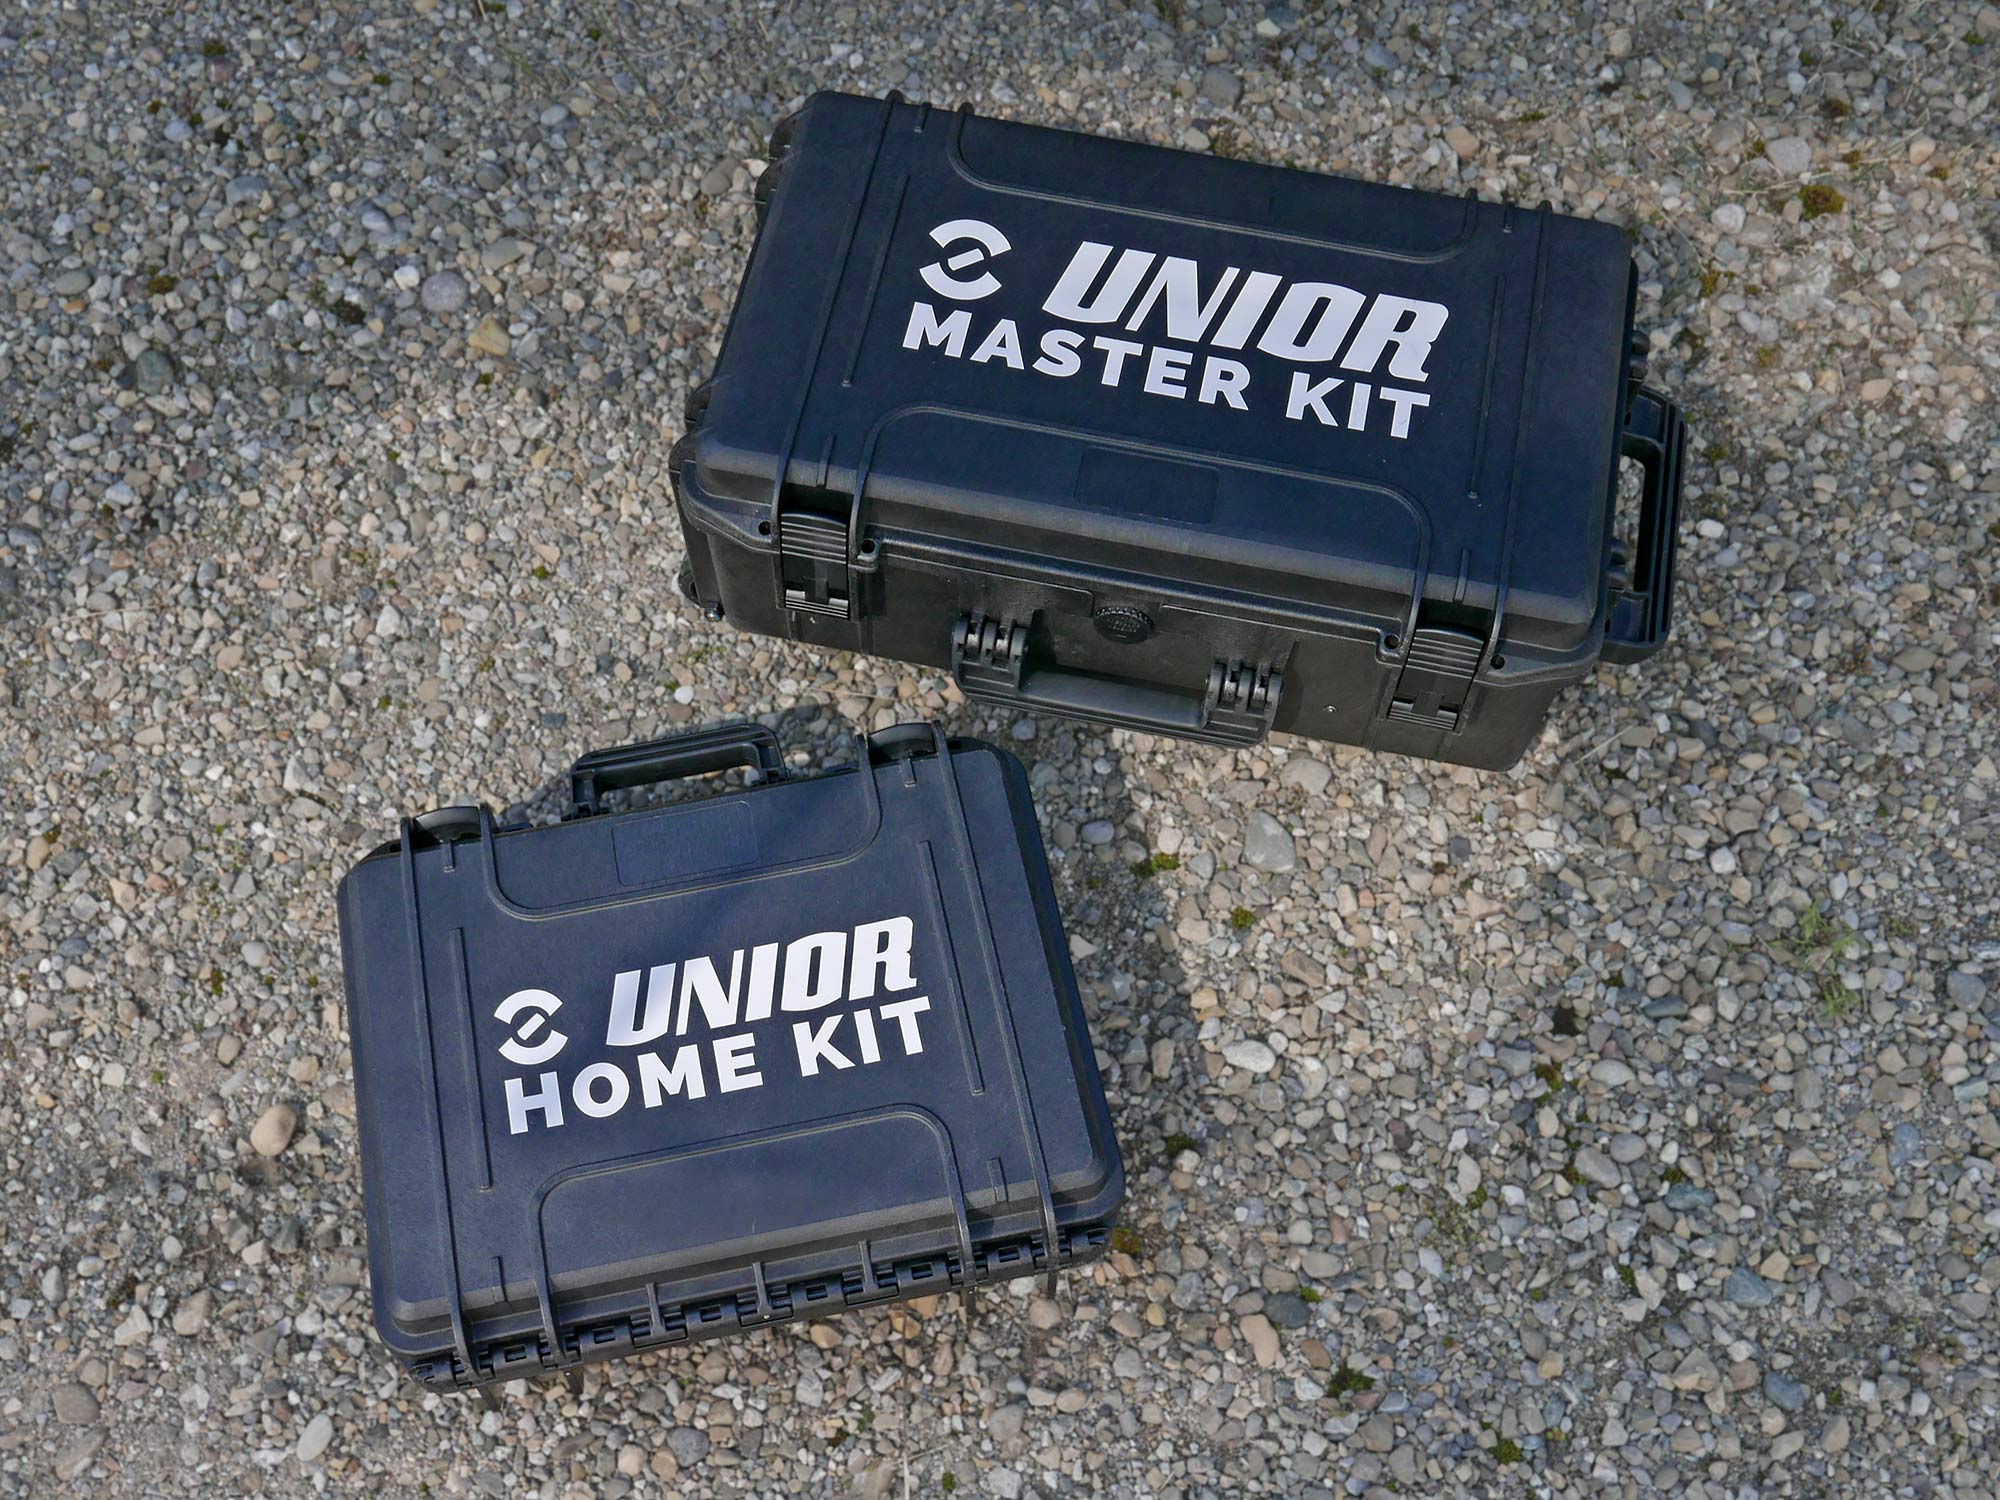 Unior professional bike tools made in Europe, Master & Home Kit toolboxes